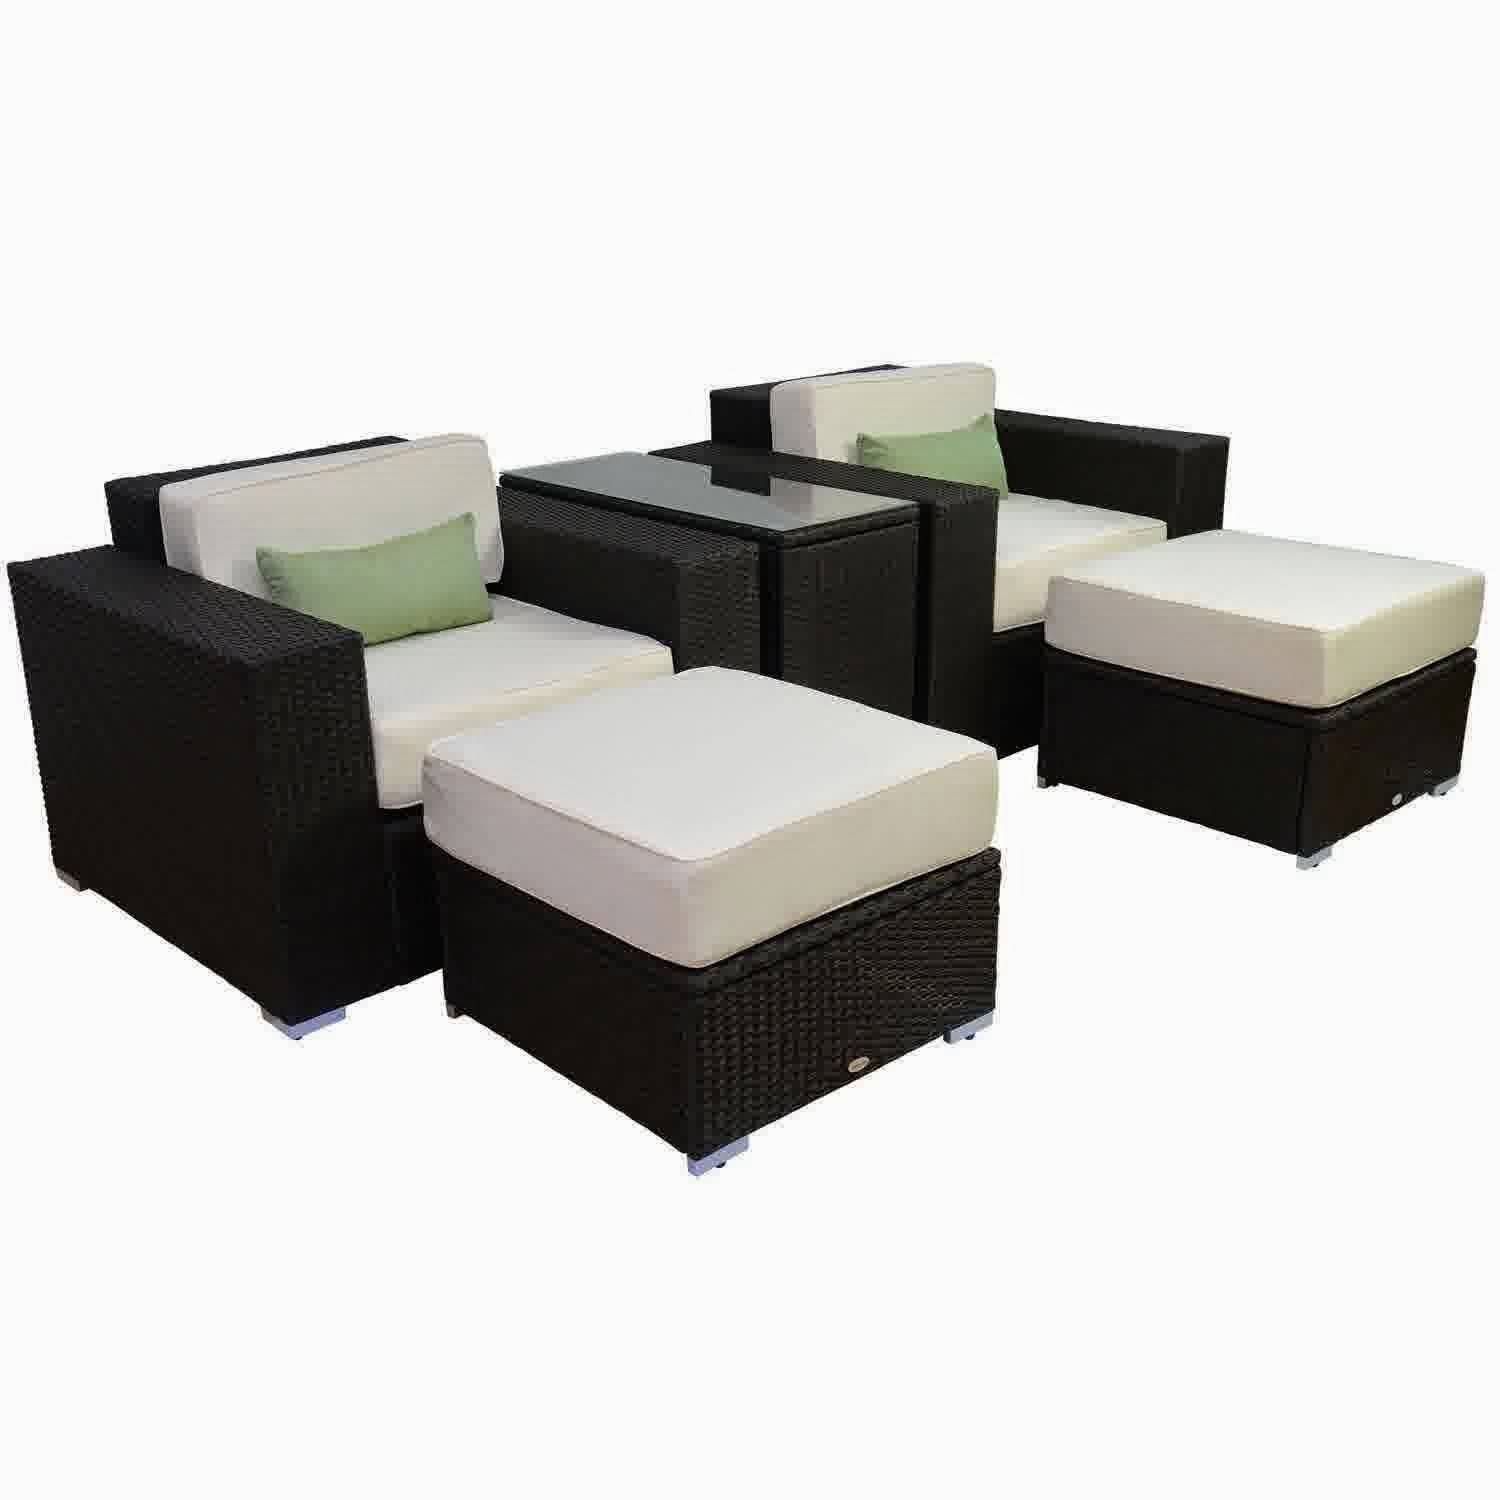 Discount Until 60% Outsunny 5pc Outdoor Pe Rattan Wicker Lounge Throughout Modern Rattan Sofas (View 13 of 30)